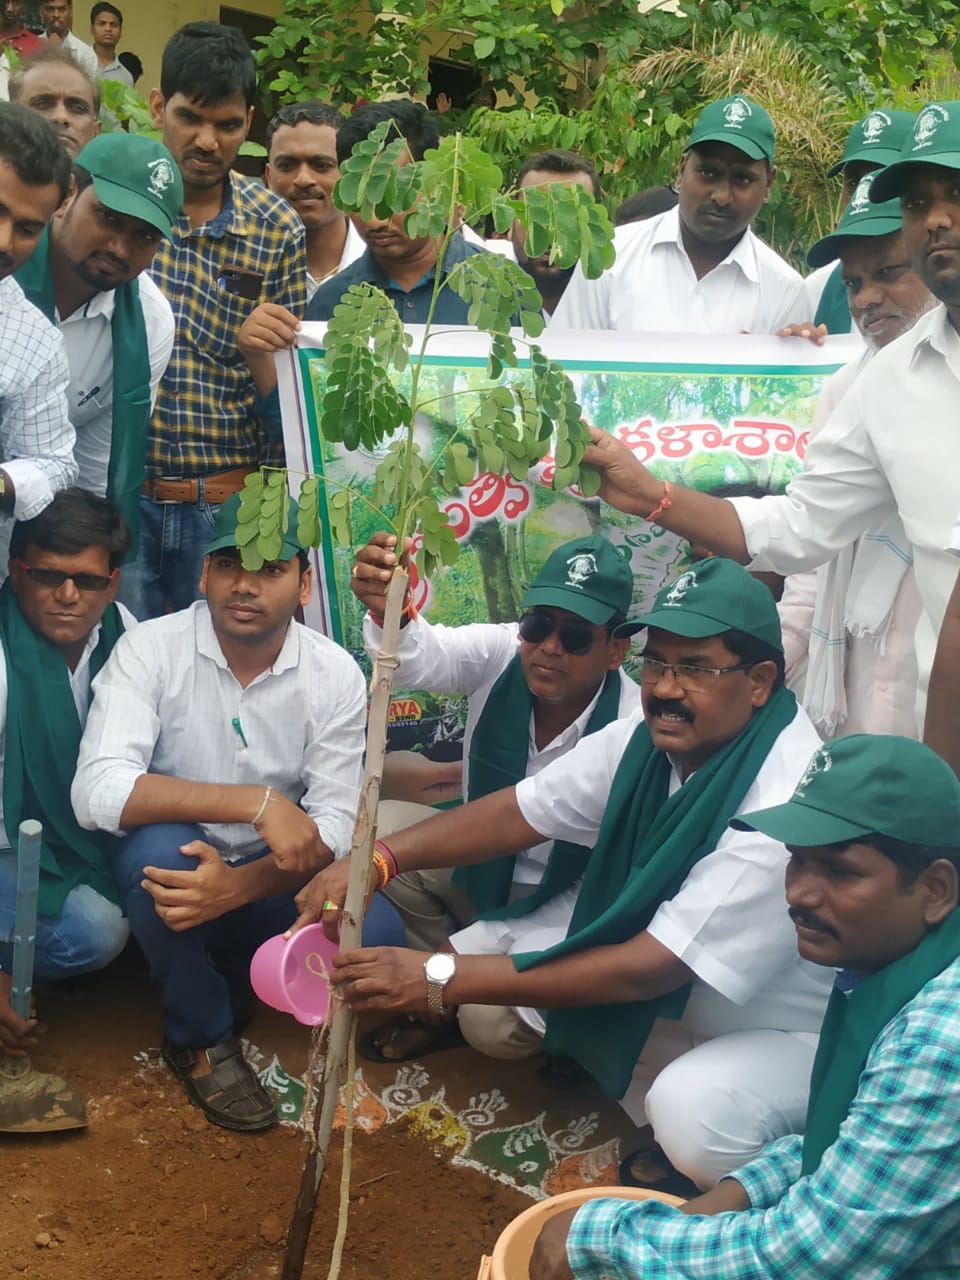 Harithaharam program conducted in the college campus 27-07-2019